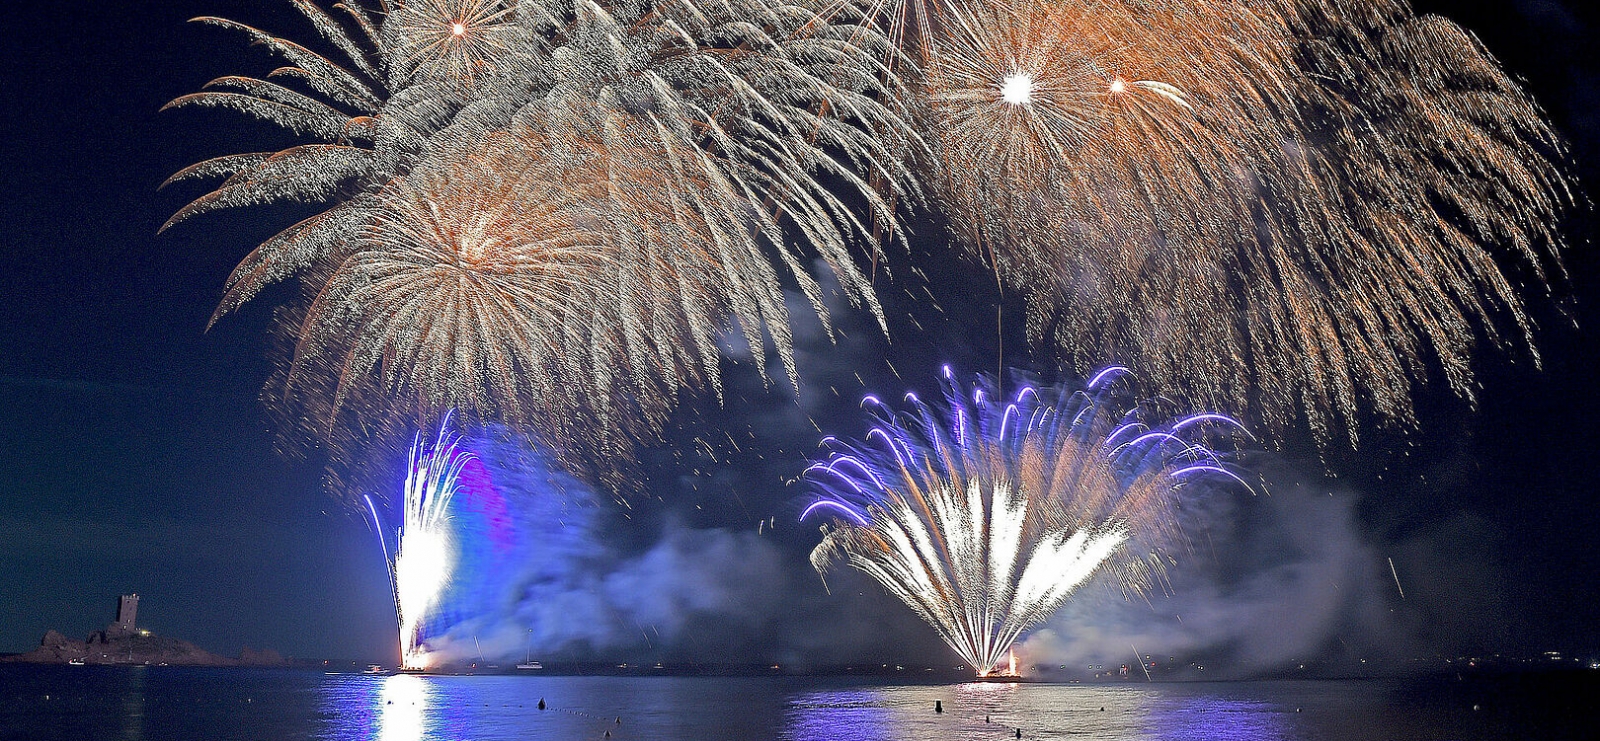 Fireworks on 7th August